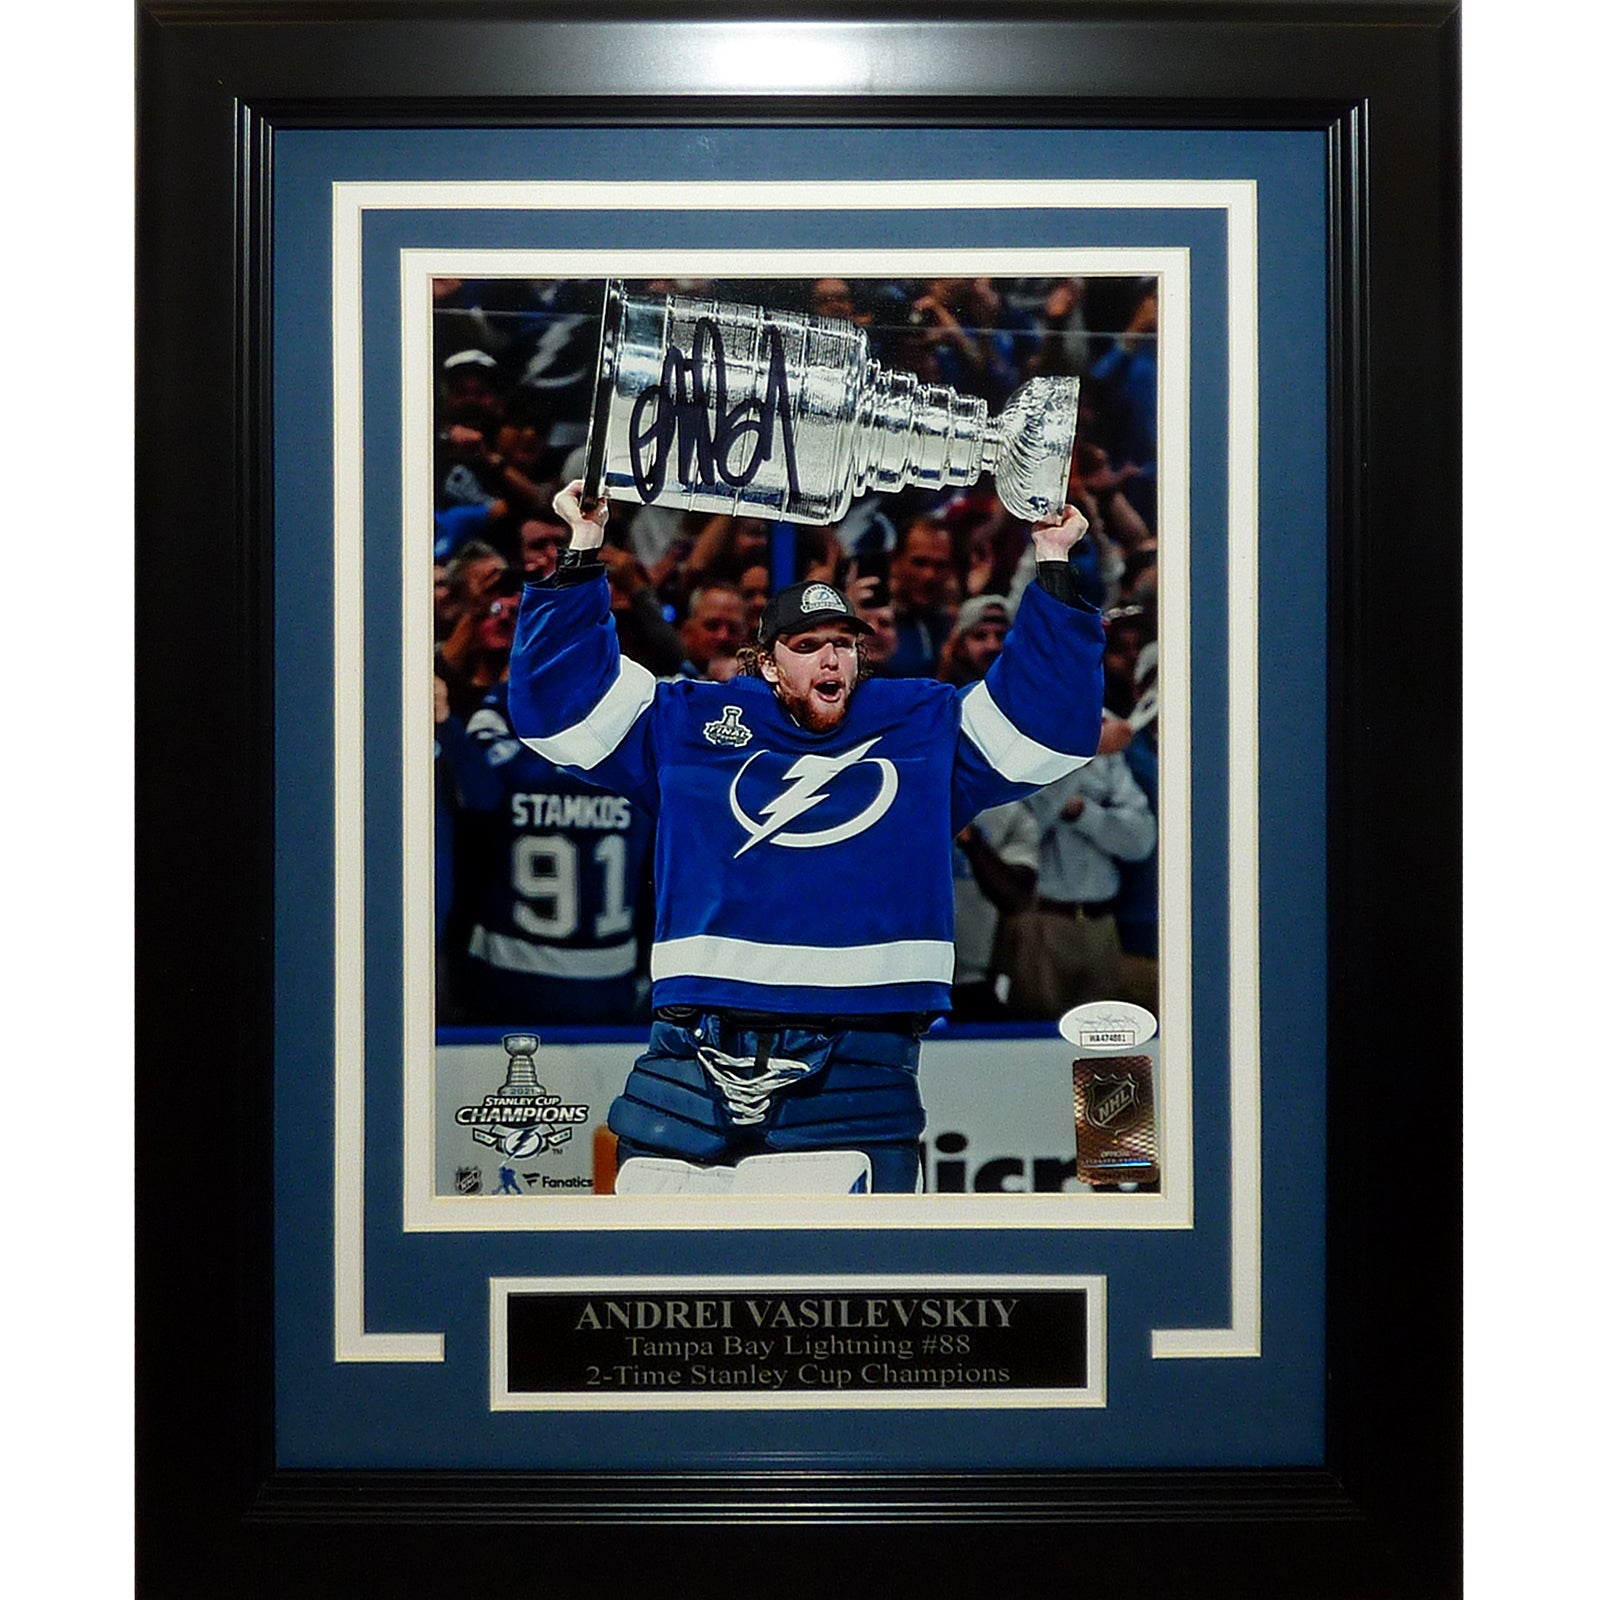 Steven Stamkos // Tampa Bay Lightning // Autographed Jersey Number Display  - Autograph Authentic - Touch of Modern